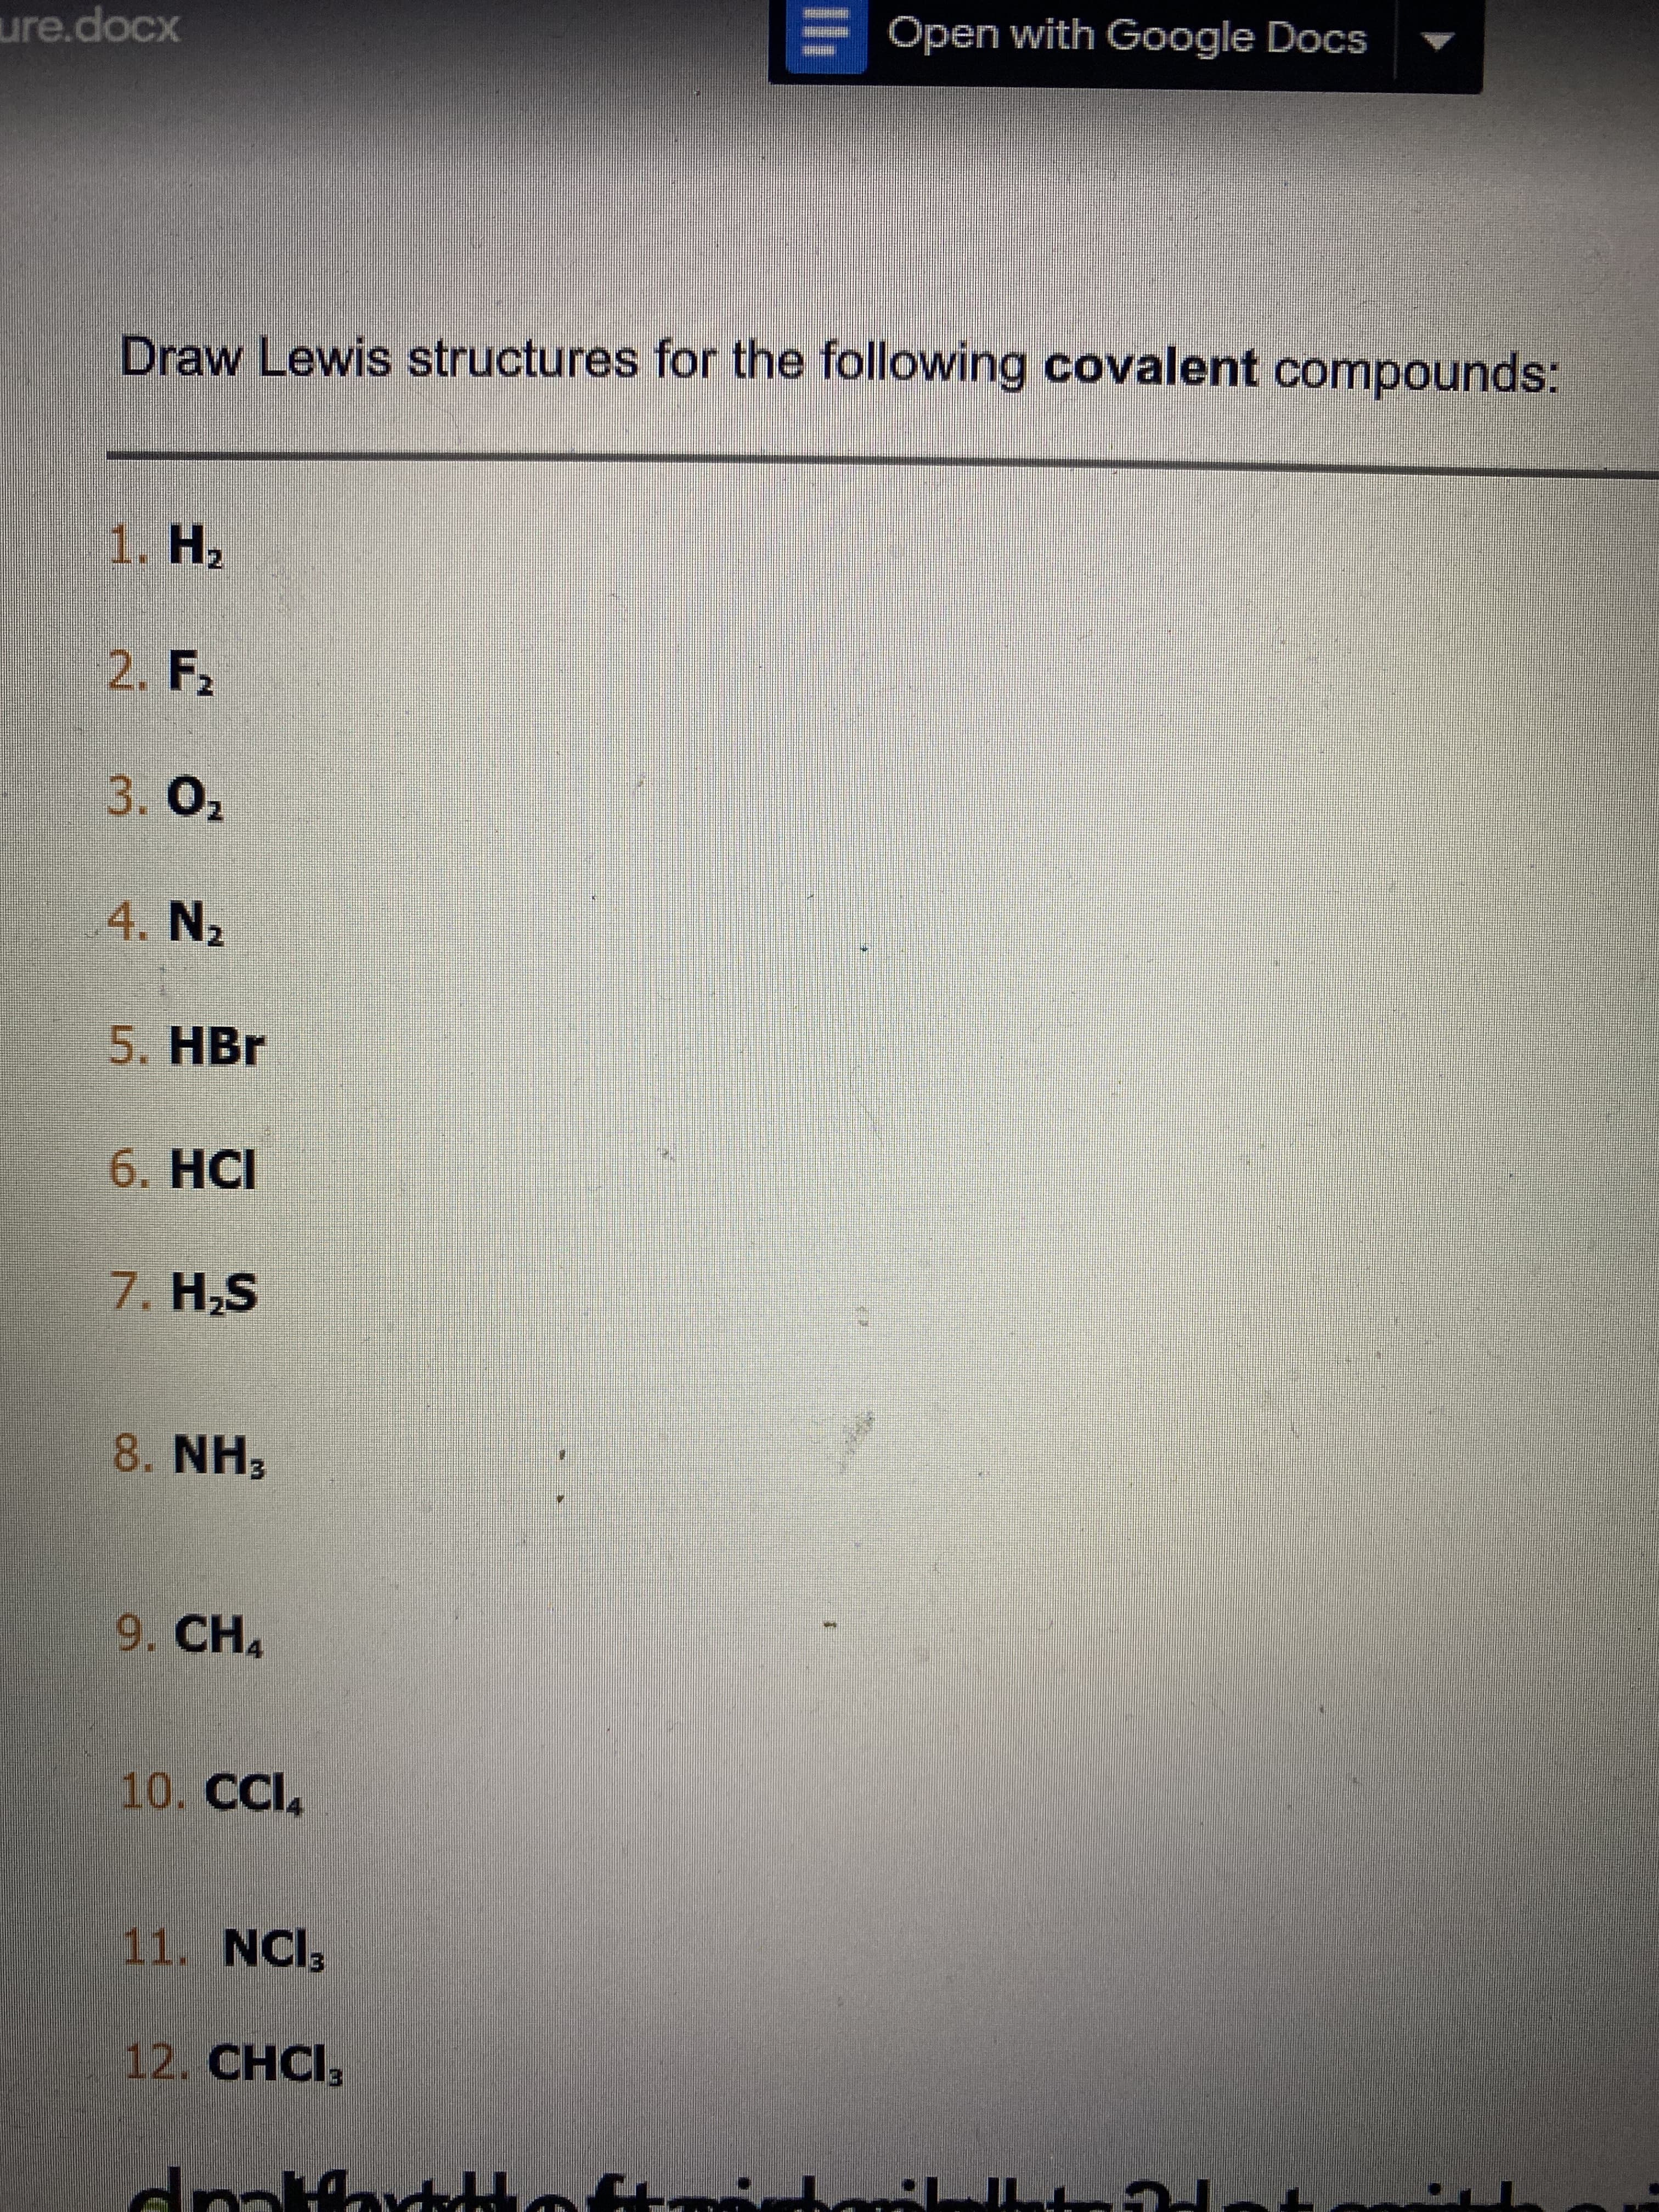 Draw Lewis structures for the following covalent compounds:
